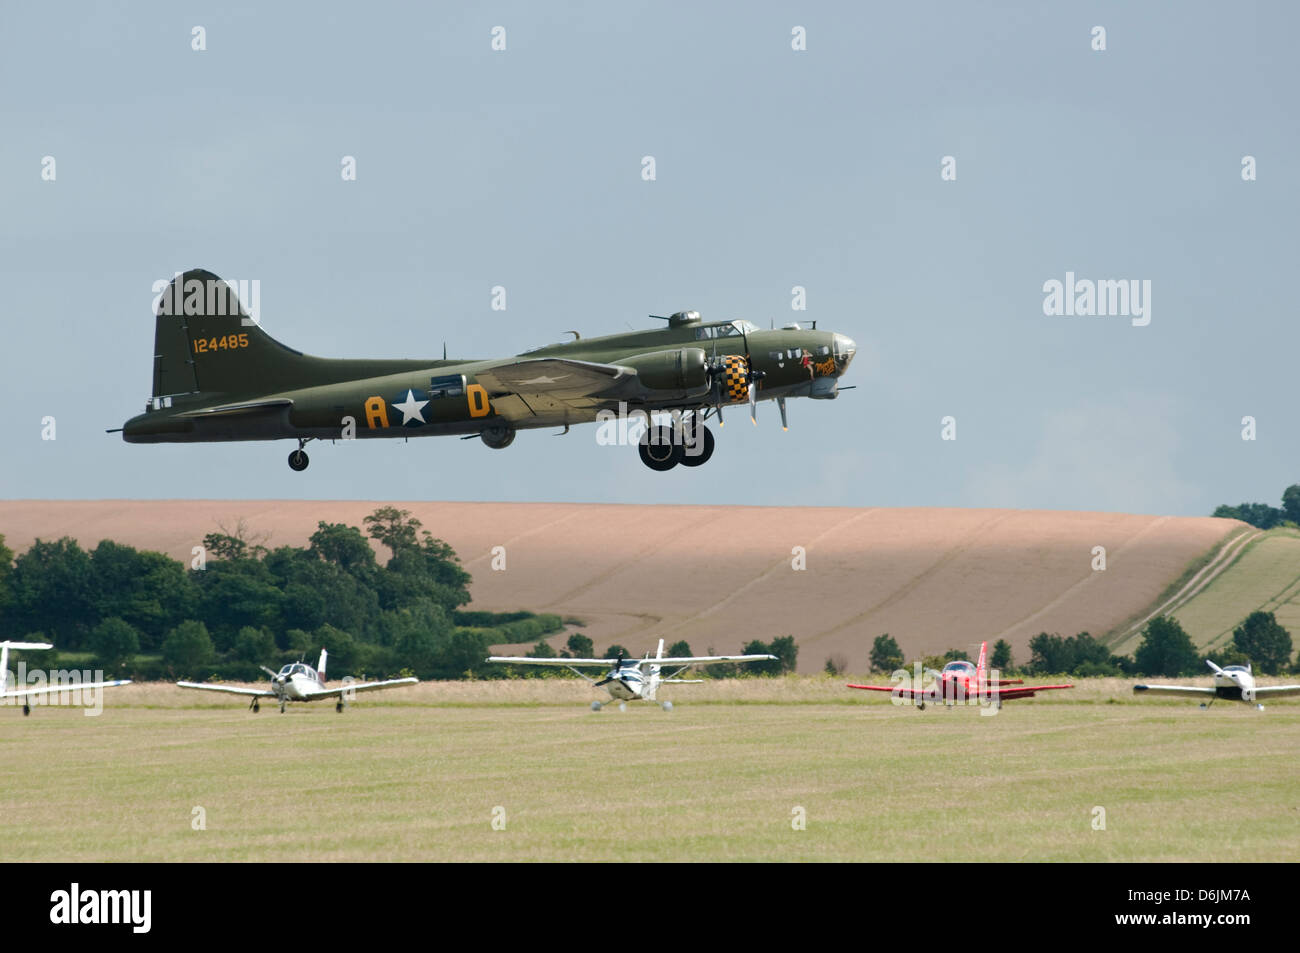 A World war two USAF B17 aircraft seen 'taking off' from an airfield. Stock Photo